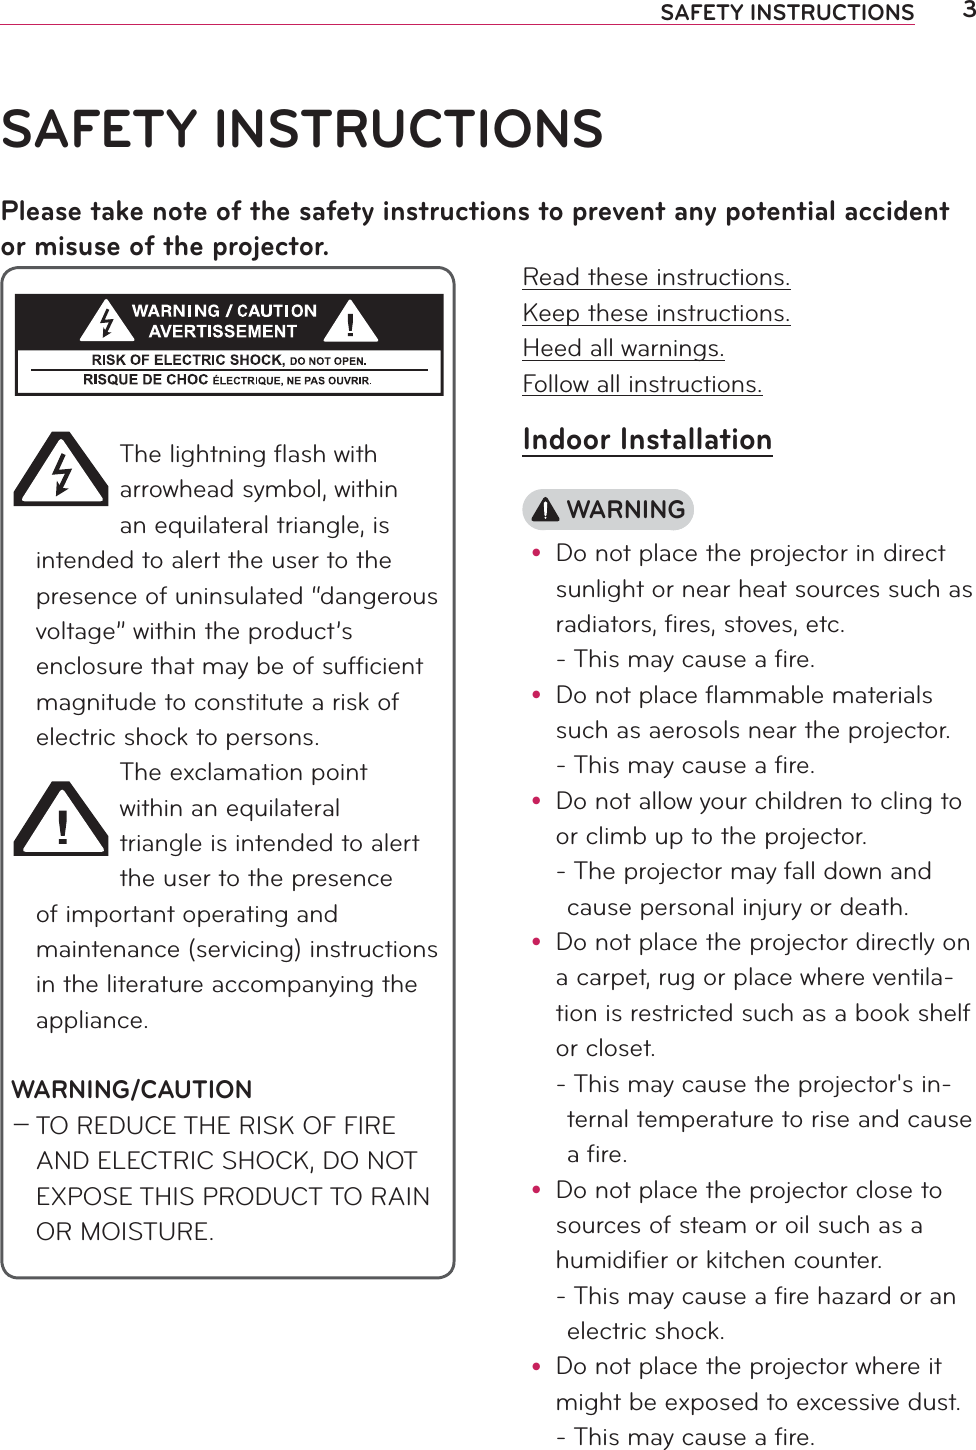 3SAFETY INSTRUCTIONSRead these instructions.Keep these instructions.Heed all warnings.Follow all instructions.Indoor Installation WARNINGy Do not place the projector in direct sunlight or near heat sources such as radiators, fires, stoves, etc. - This may cause a fire.y Do not place flammable materials such as aerosols near the projector. - This may cause a fire.y Do not allow your children to cling to or climb up to the projector. -  The projector may fall down and cause personal injury or death.y Do not place the projector directly on a carpet, rug or place where ventila-tion is restricted such as a book shelf or closet. -  This may cause the projector&apos;s in-ternal temperature to rise and cause a fire.y Do not place the projector close to sources of steam or oil such as a humidifier or kitchen counter. -  This may cause a fire hazard or an electric shock.y Do not place the projector where it might be exposed to excessive dust. -  This may cause a fire.SAFETY INSTRUCTIONSPlease take note of the safety instructions to prevent any potential accident or misuse of the projector.The lightning ﬂash with arrowhead symbol, within an equilateral triangle, is intended to alert the user to the presence of uninsulated “dangerous voltage” within the product’s enclosure that may be of sufﬁcient magnitude to constitute a risk of electric shock to persons.The exclamation point within an equilateral triangle is intended to alert the user to the presence of important operating and maintenance (servicing) instructions in the literature accompanying the appliance.WARNING/CAUTION0 TO REDUCE THE RISK OF FIRE AND ELECTRIC SHOCK, DO NOT EXPOSE THIS PRODUCT TO RAIN OR MOISTURE.